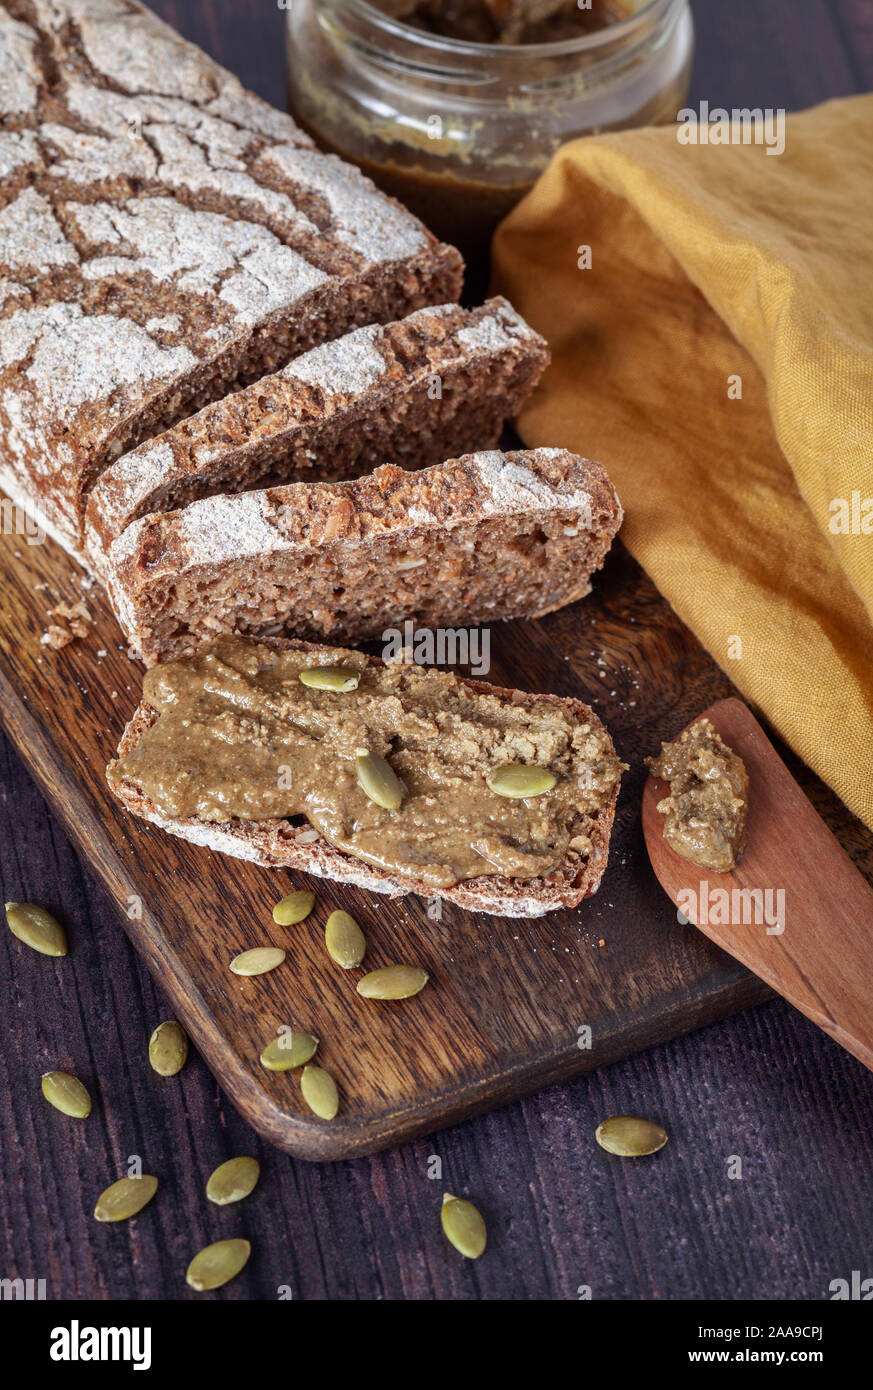 Fresh home baked rye bread with homemade pumpkin seed spread on wooden board Stock Photo